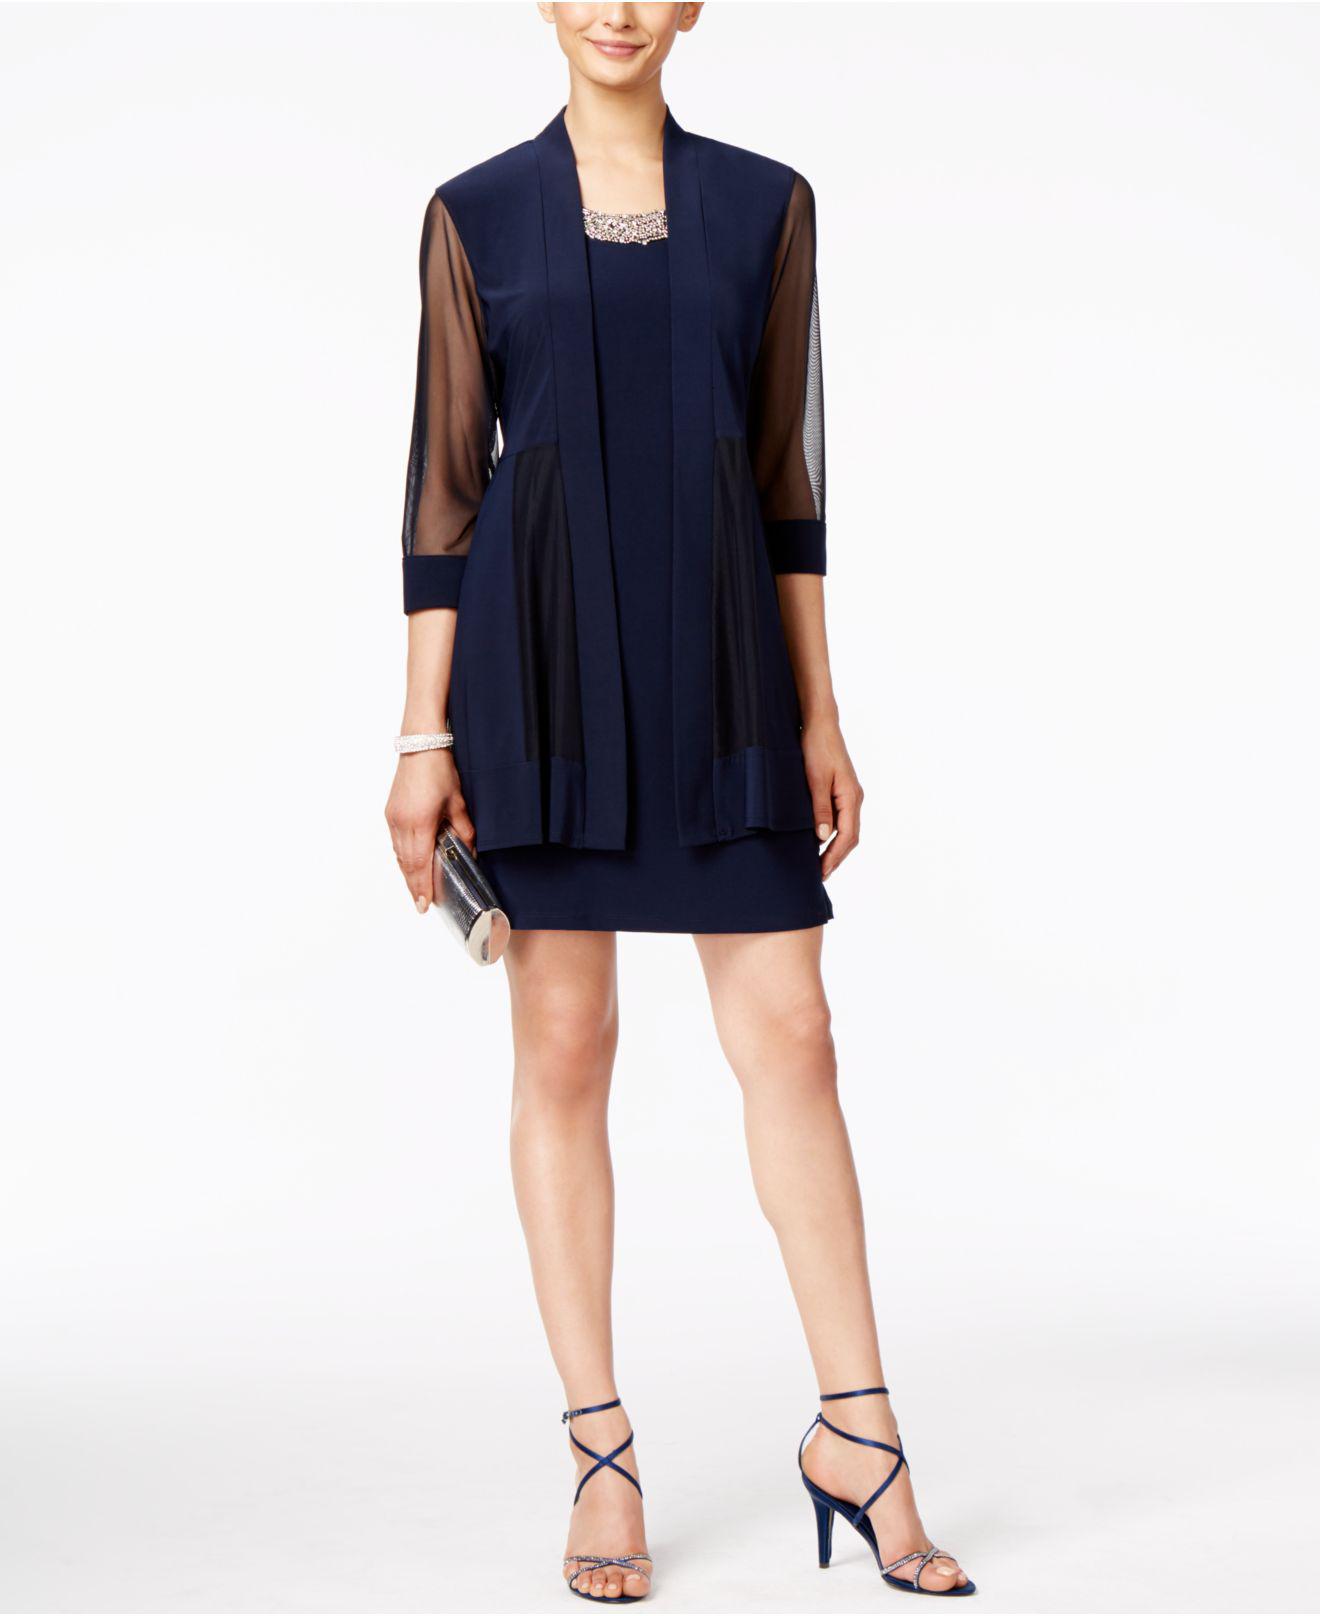 Lyst - R & M Richards Embellished Dress And Illusion Duster Jacket in Blue